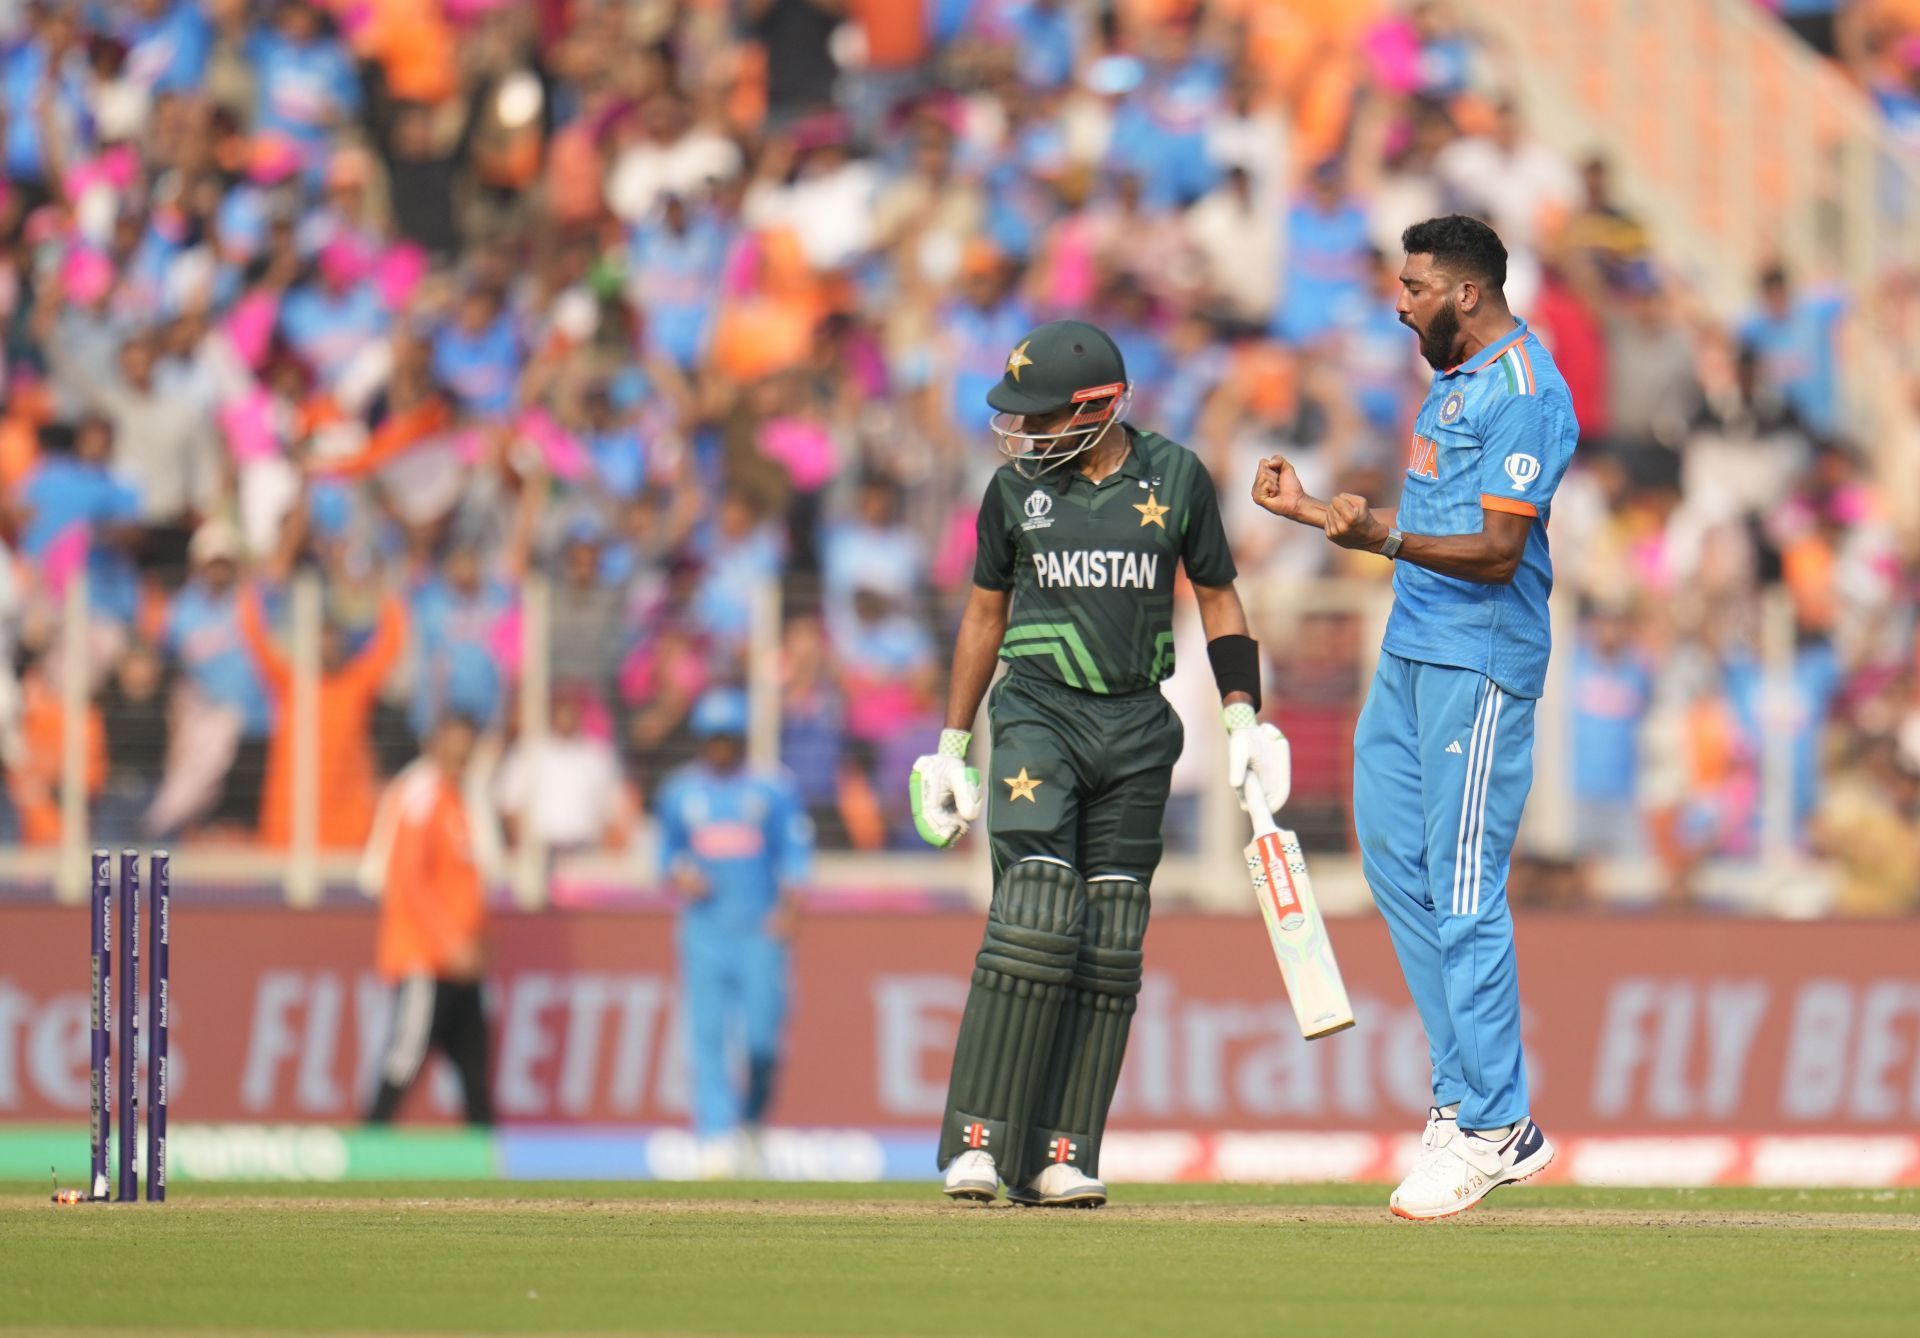 Babar Azam was bowled by Mohammed Siraj. [P/C: AP]